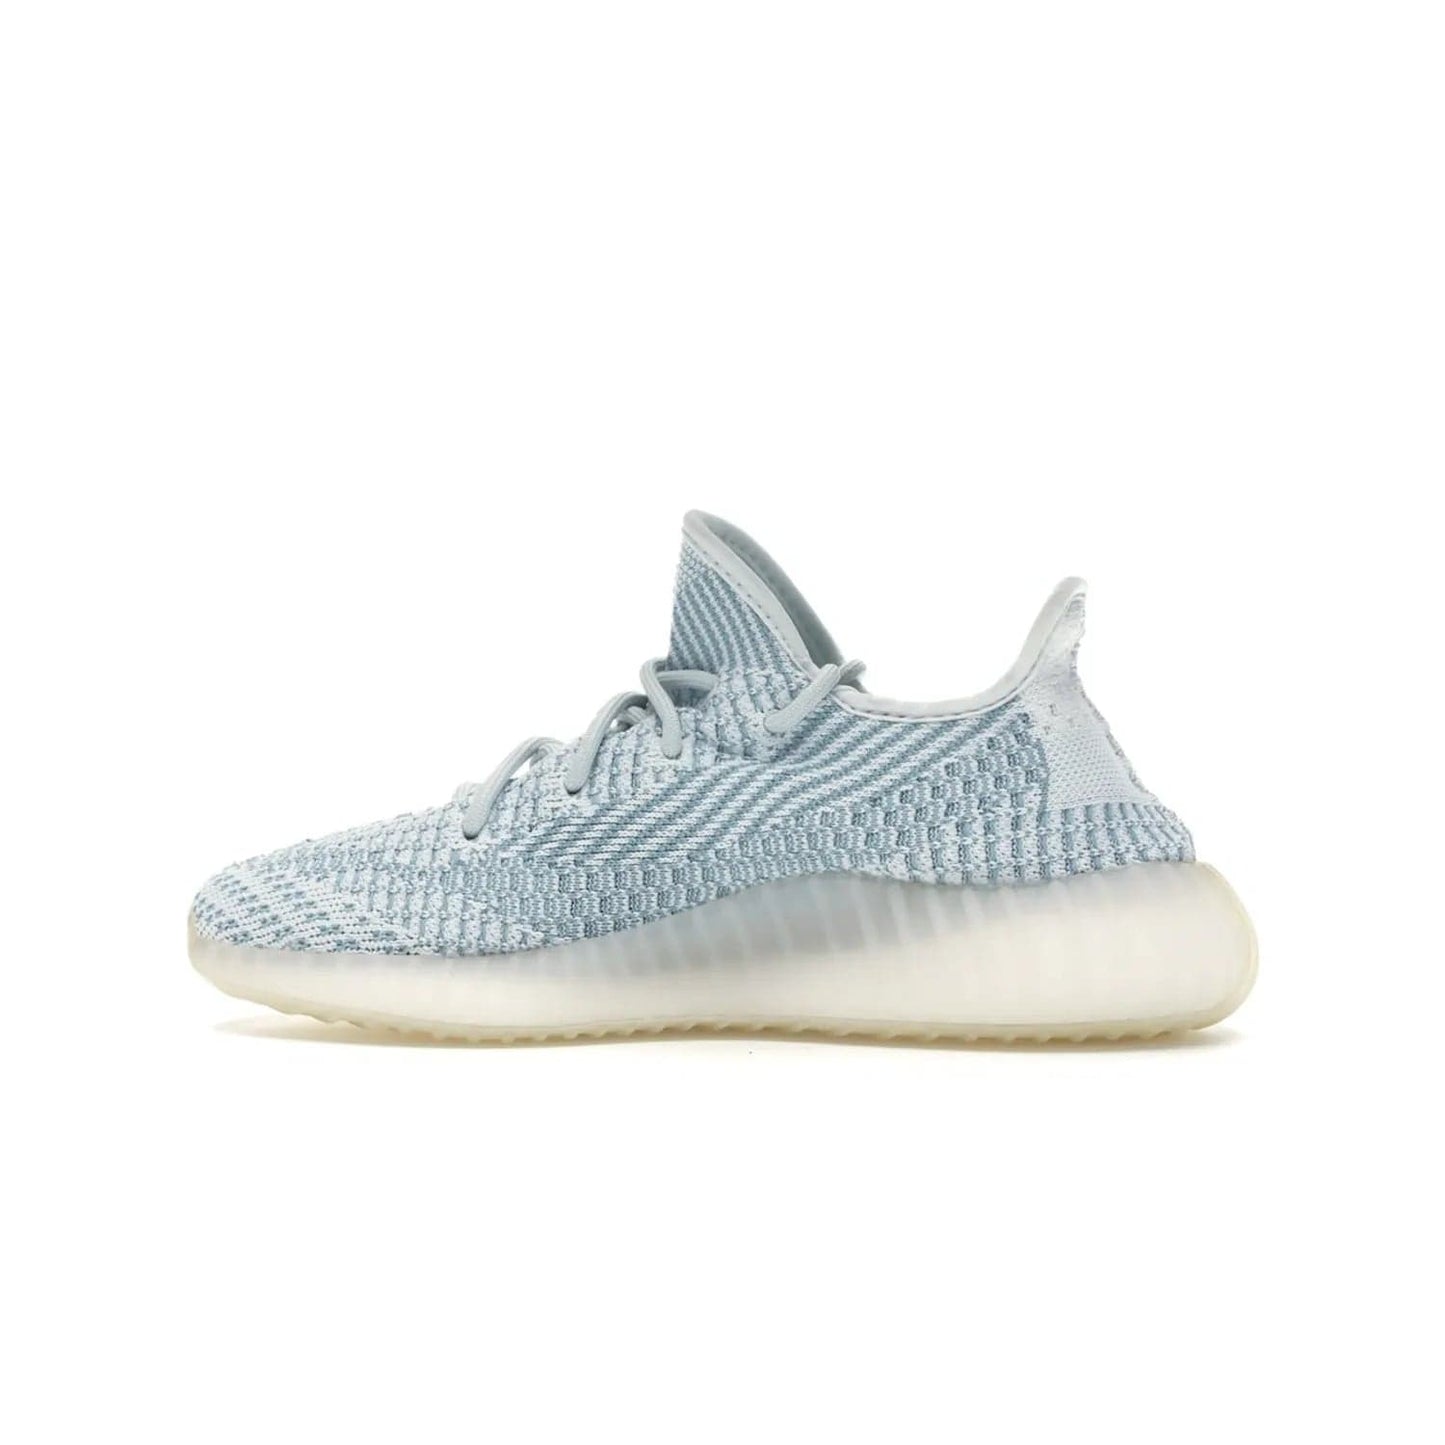 adidas Yeezy Boost 350 V2 Cloud White (Non-Reflective) - Image 20 - Only at www.BallersClubKickz.com - Adidas Yeezy Boost 350 V2 Cloud White (Non-Reflective) features Primeknit fabric and a unique, eye-catching design of cream, bluish-white, and transparent strip. Step out in timeless style with this eye-catching sneaker.